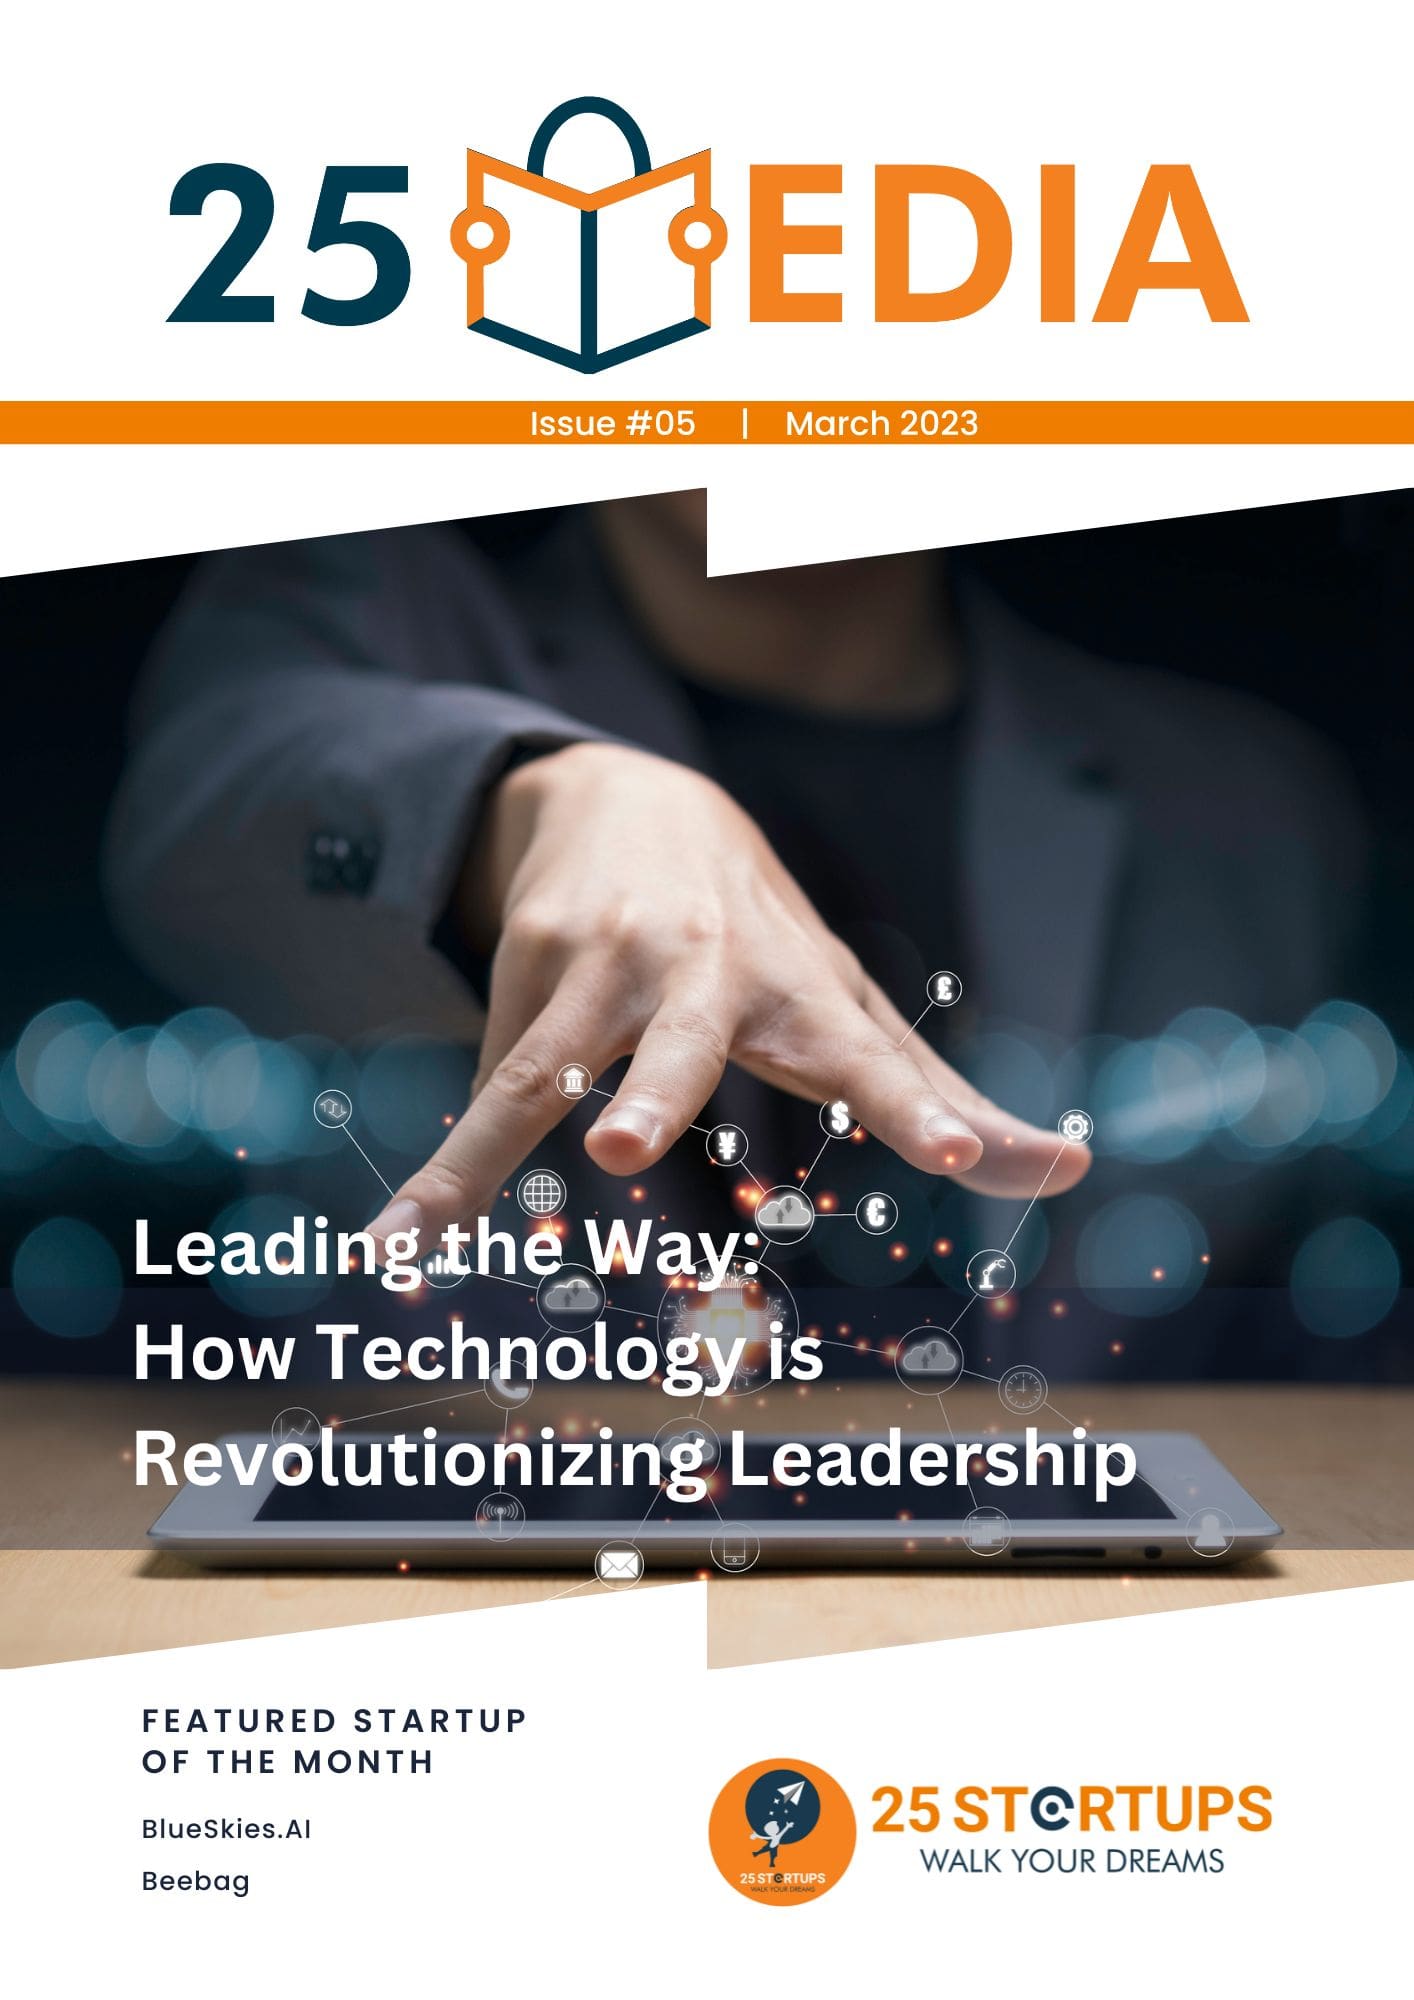 25 Media Issue #05: Leading the Way: How Technology is Revolutionizing Leadership